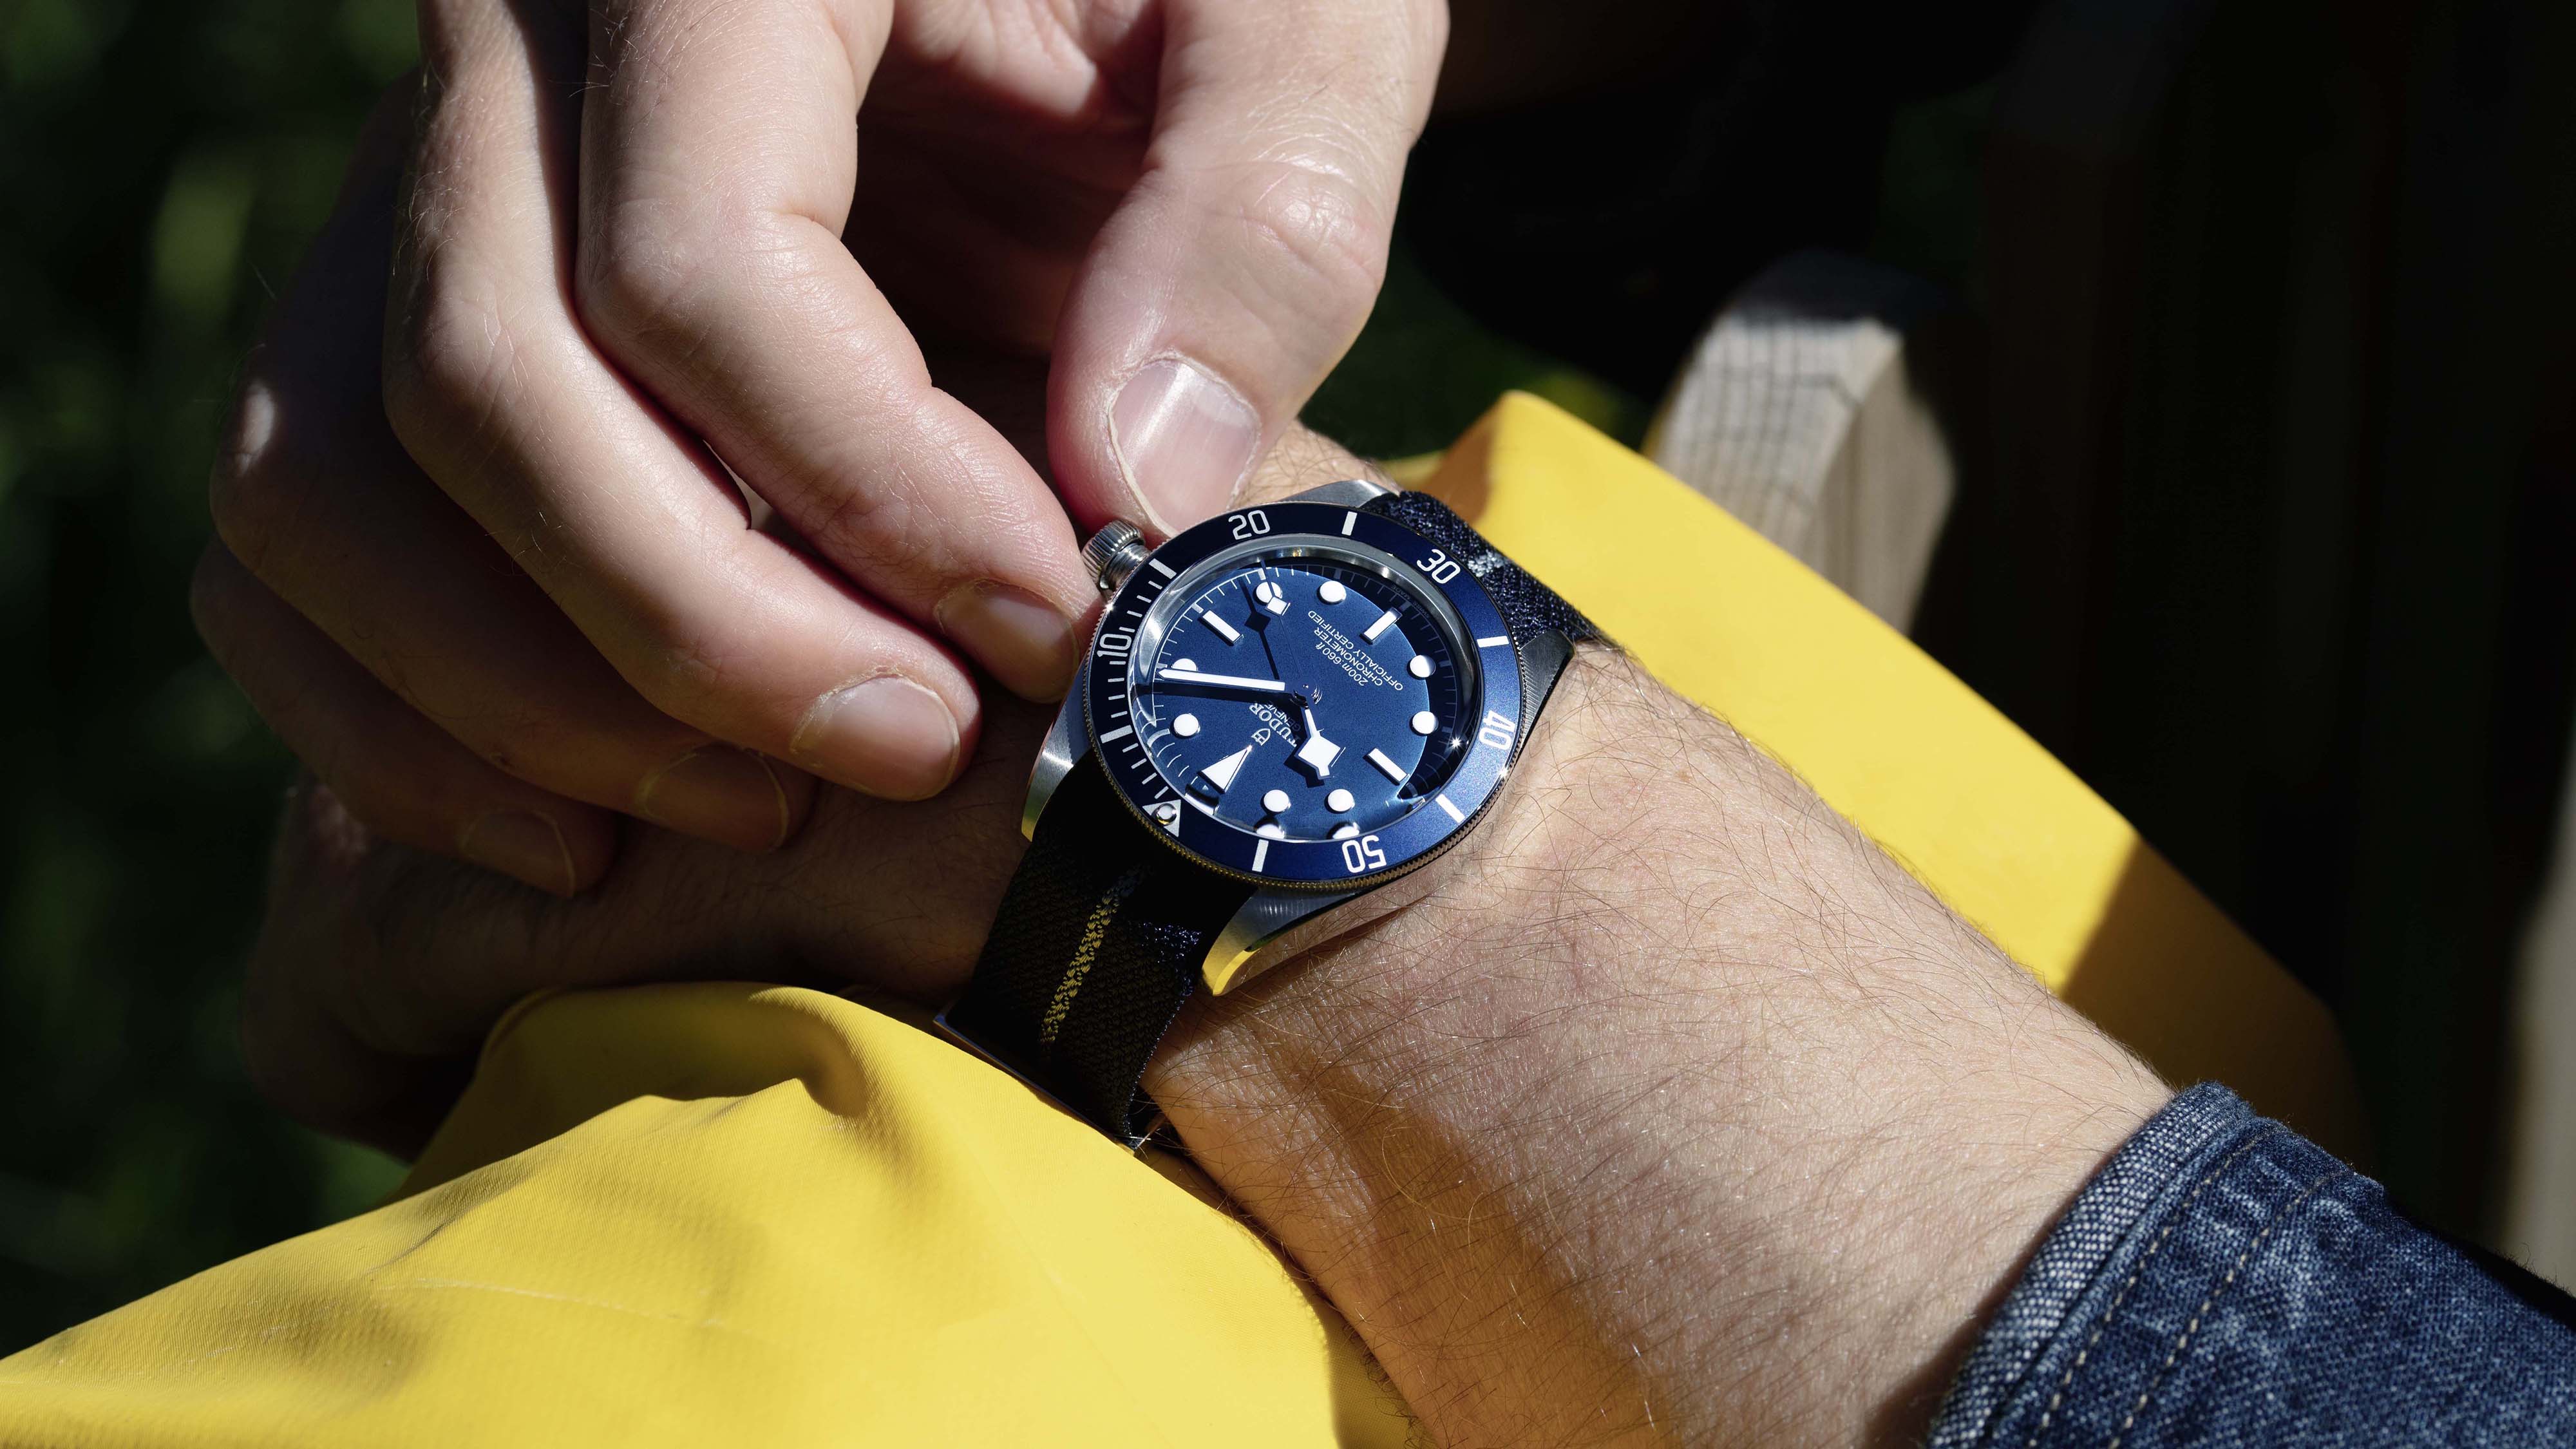 What watches do divers actually use? | T3